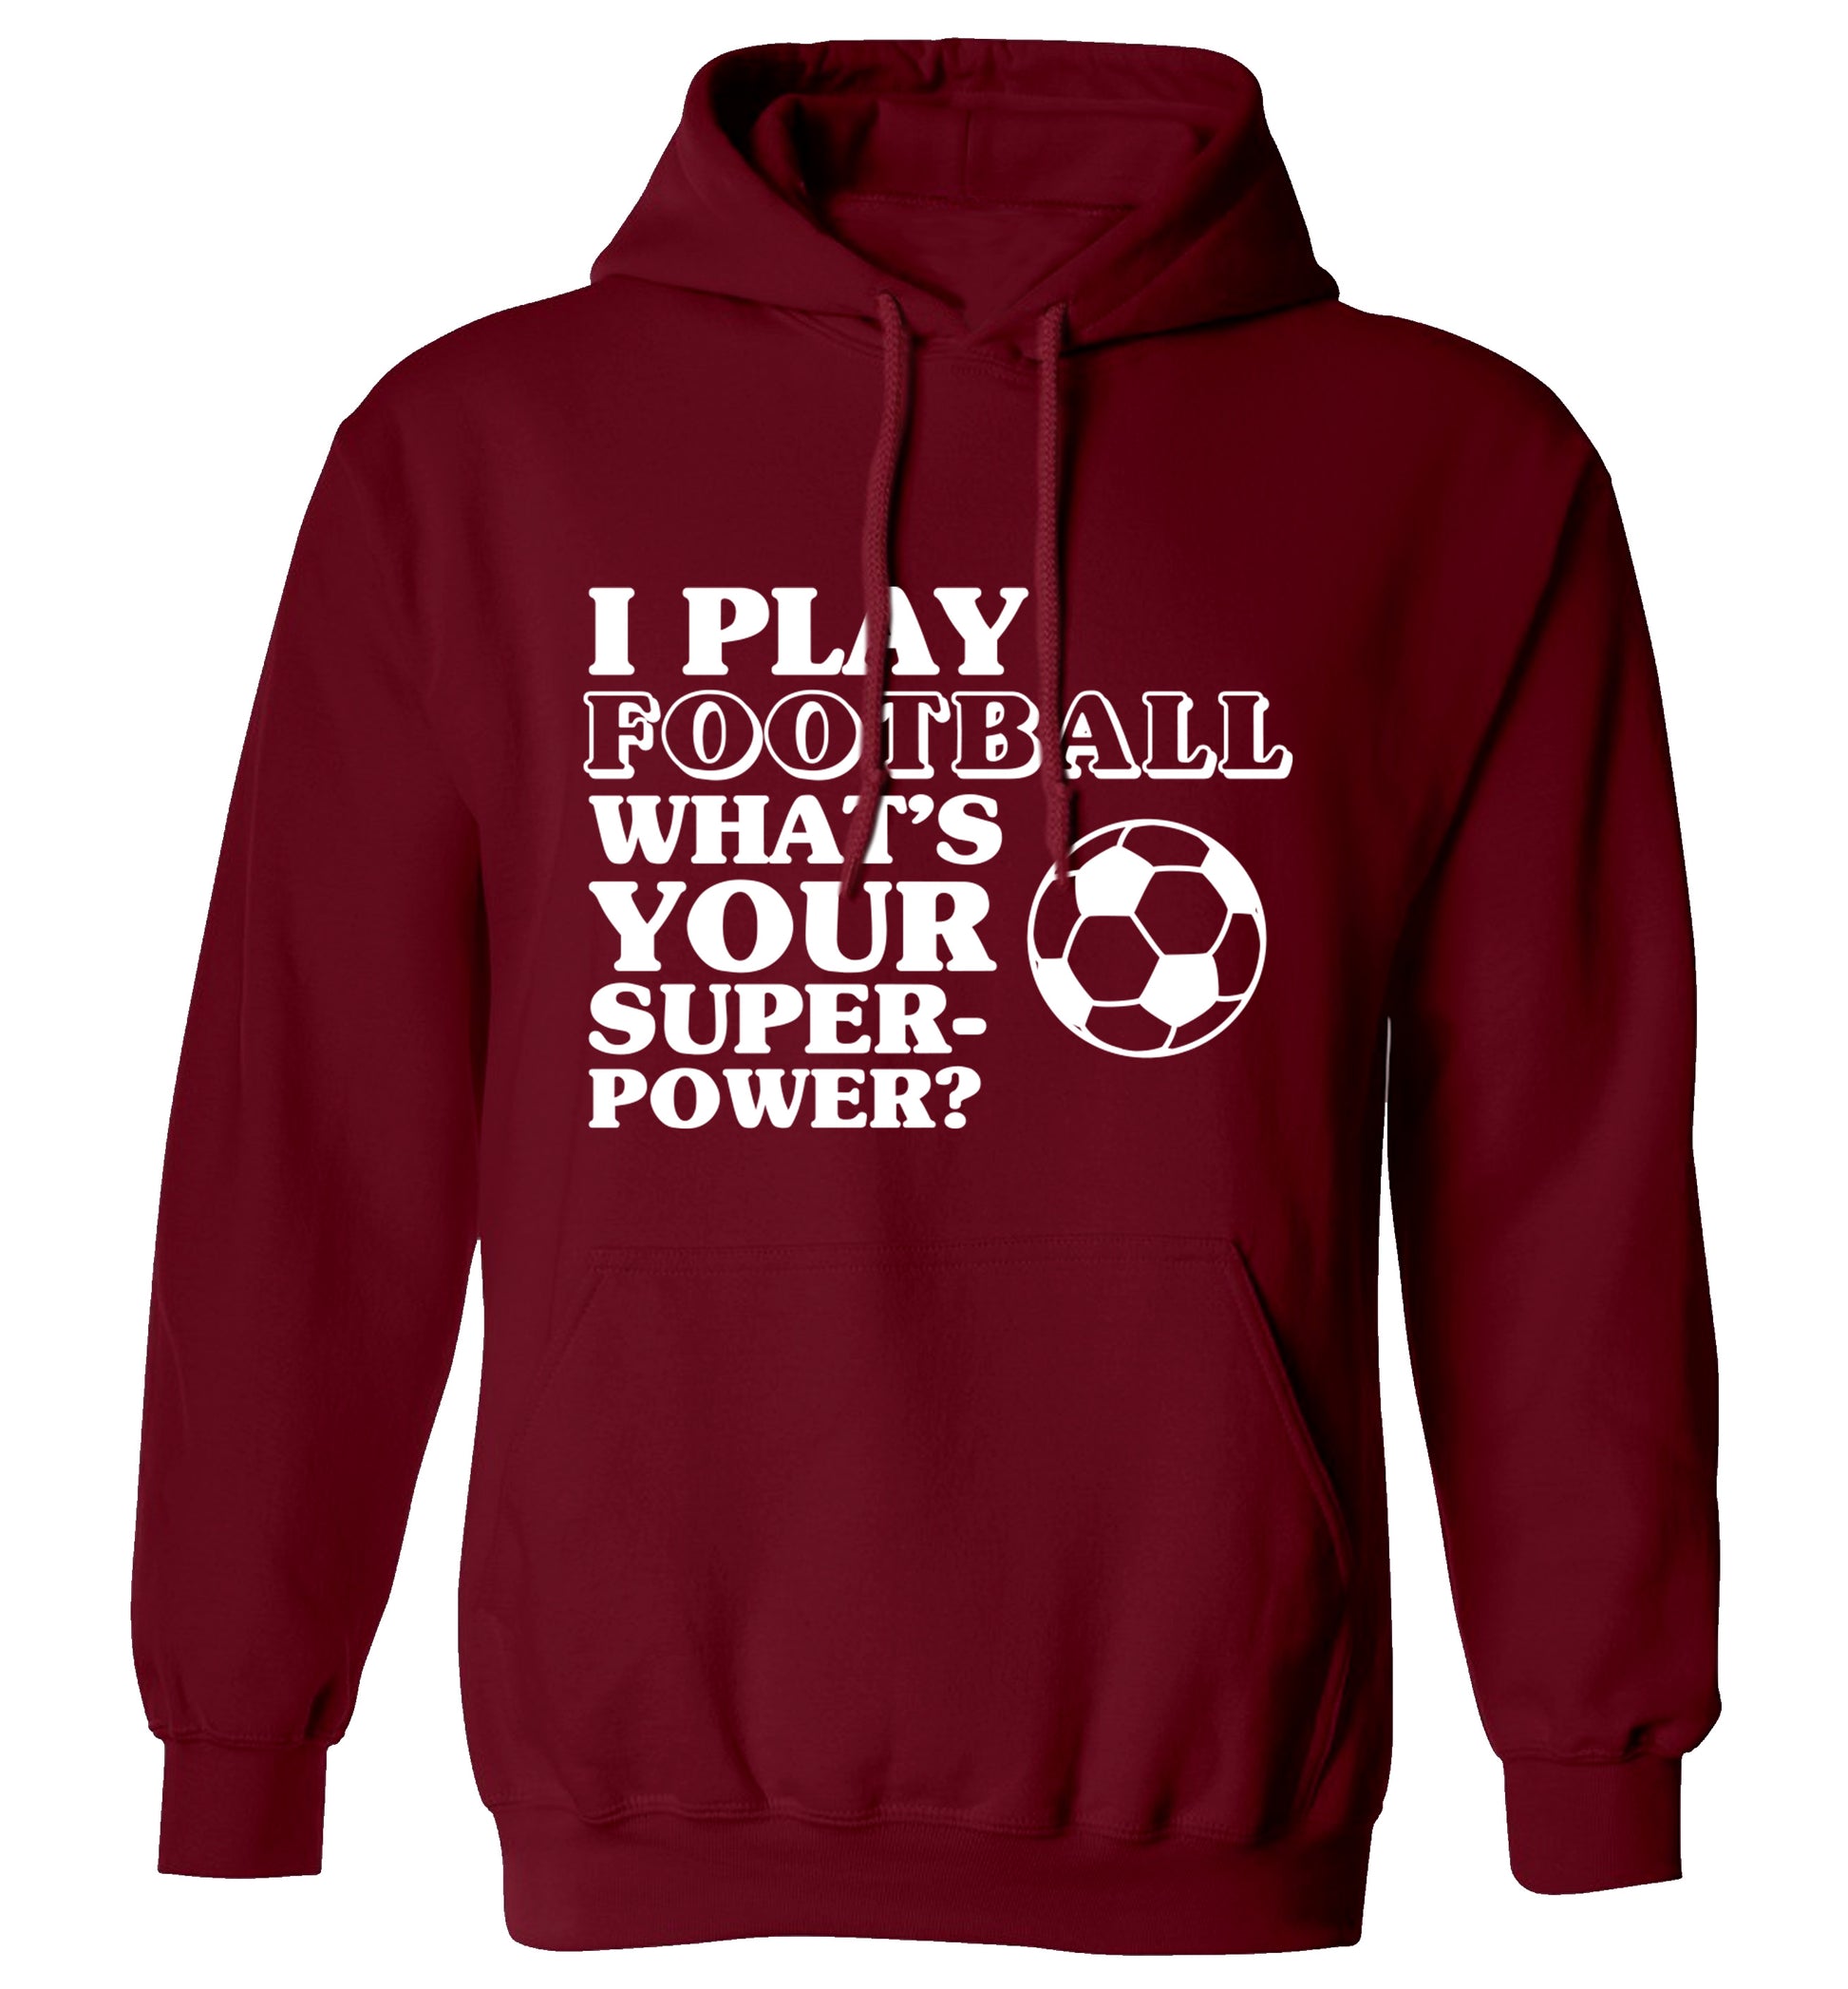 I play football what's your superpower? adults unisexmaroon hoodie 2XL